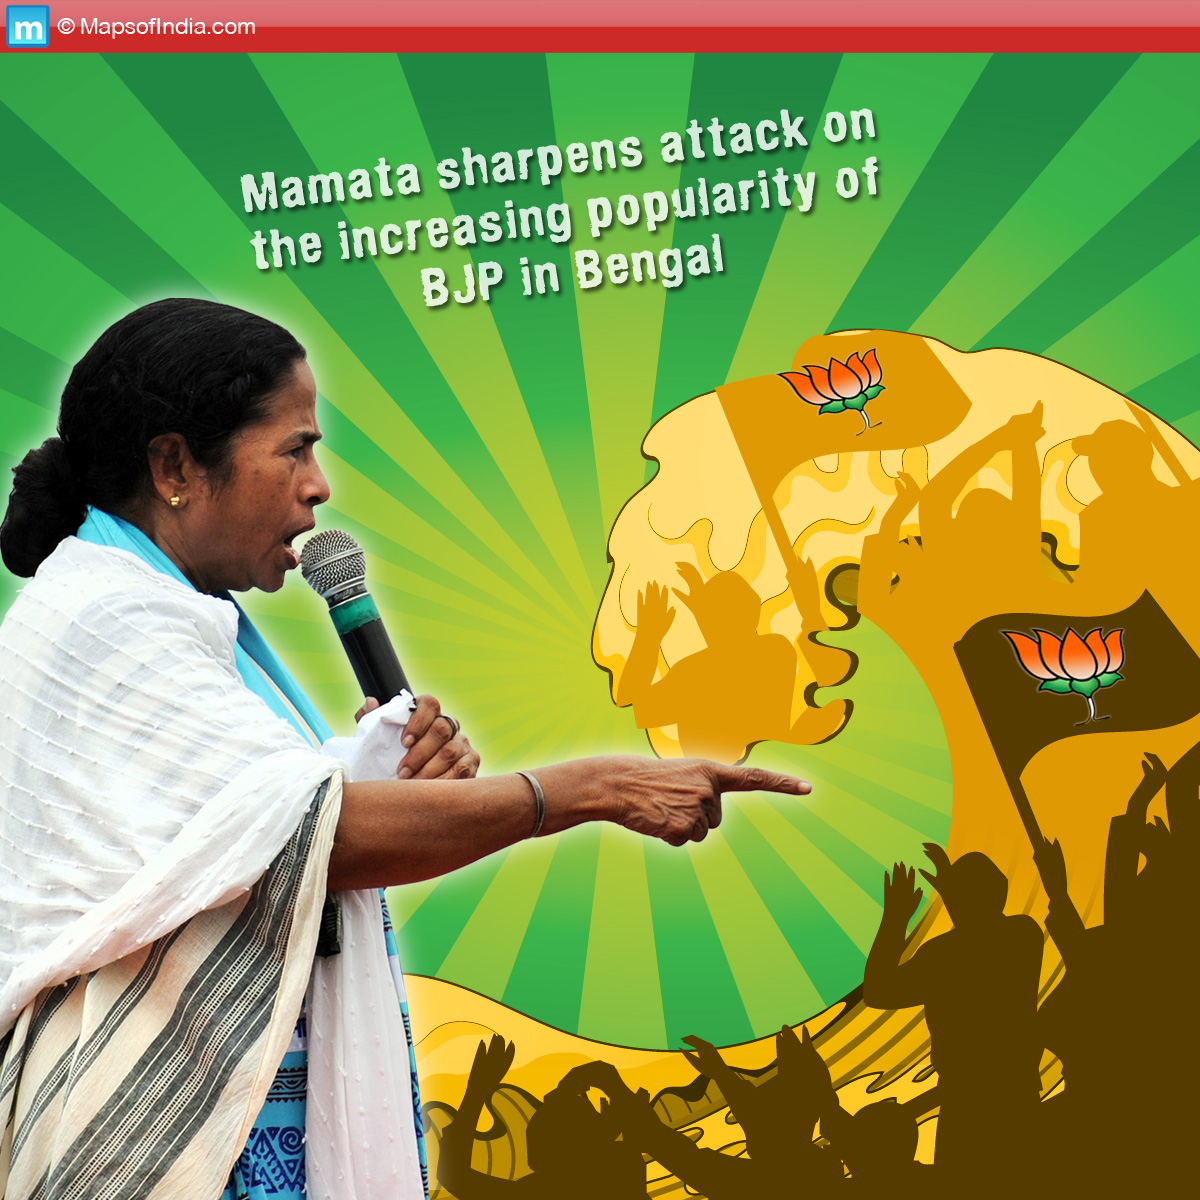 Mamata sharpens attack on the increasing popularity of BJP in Bengal